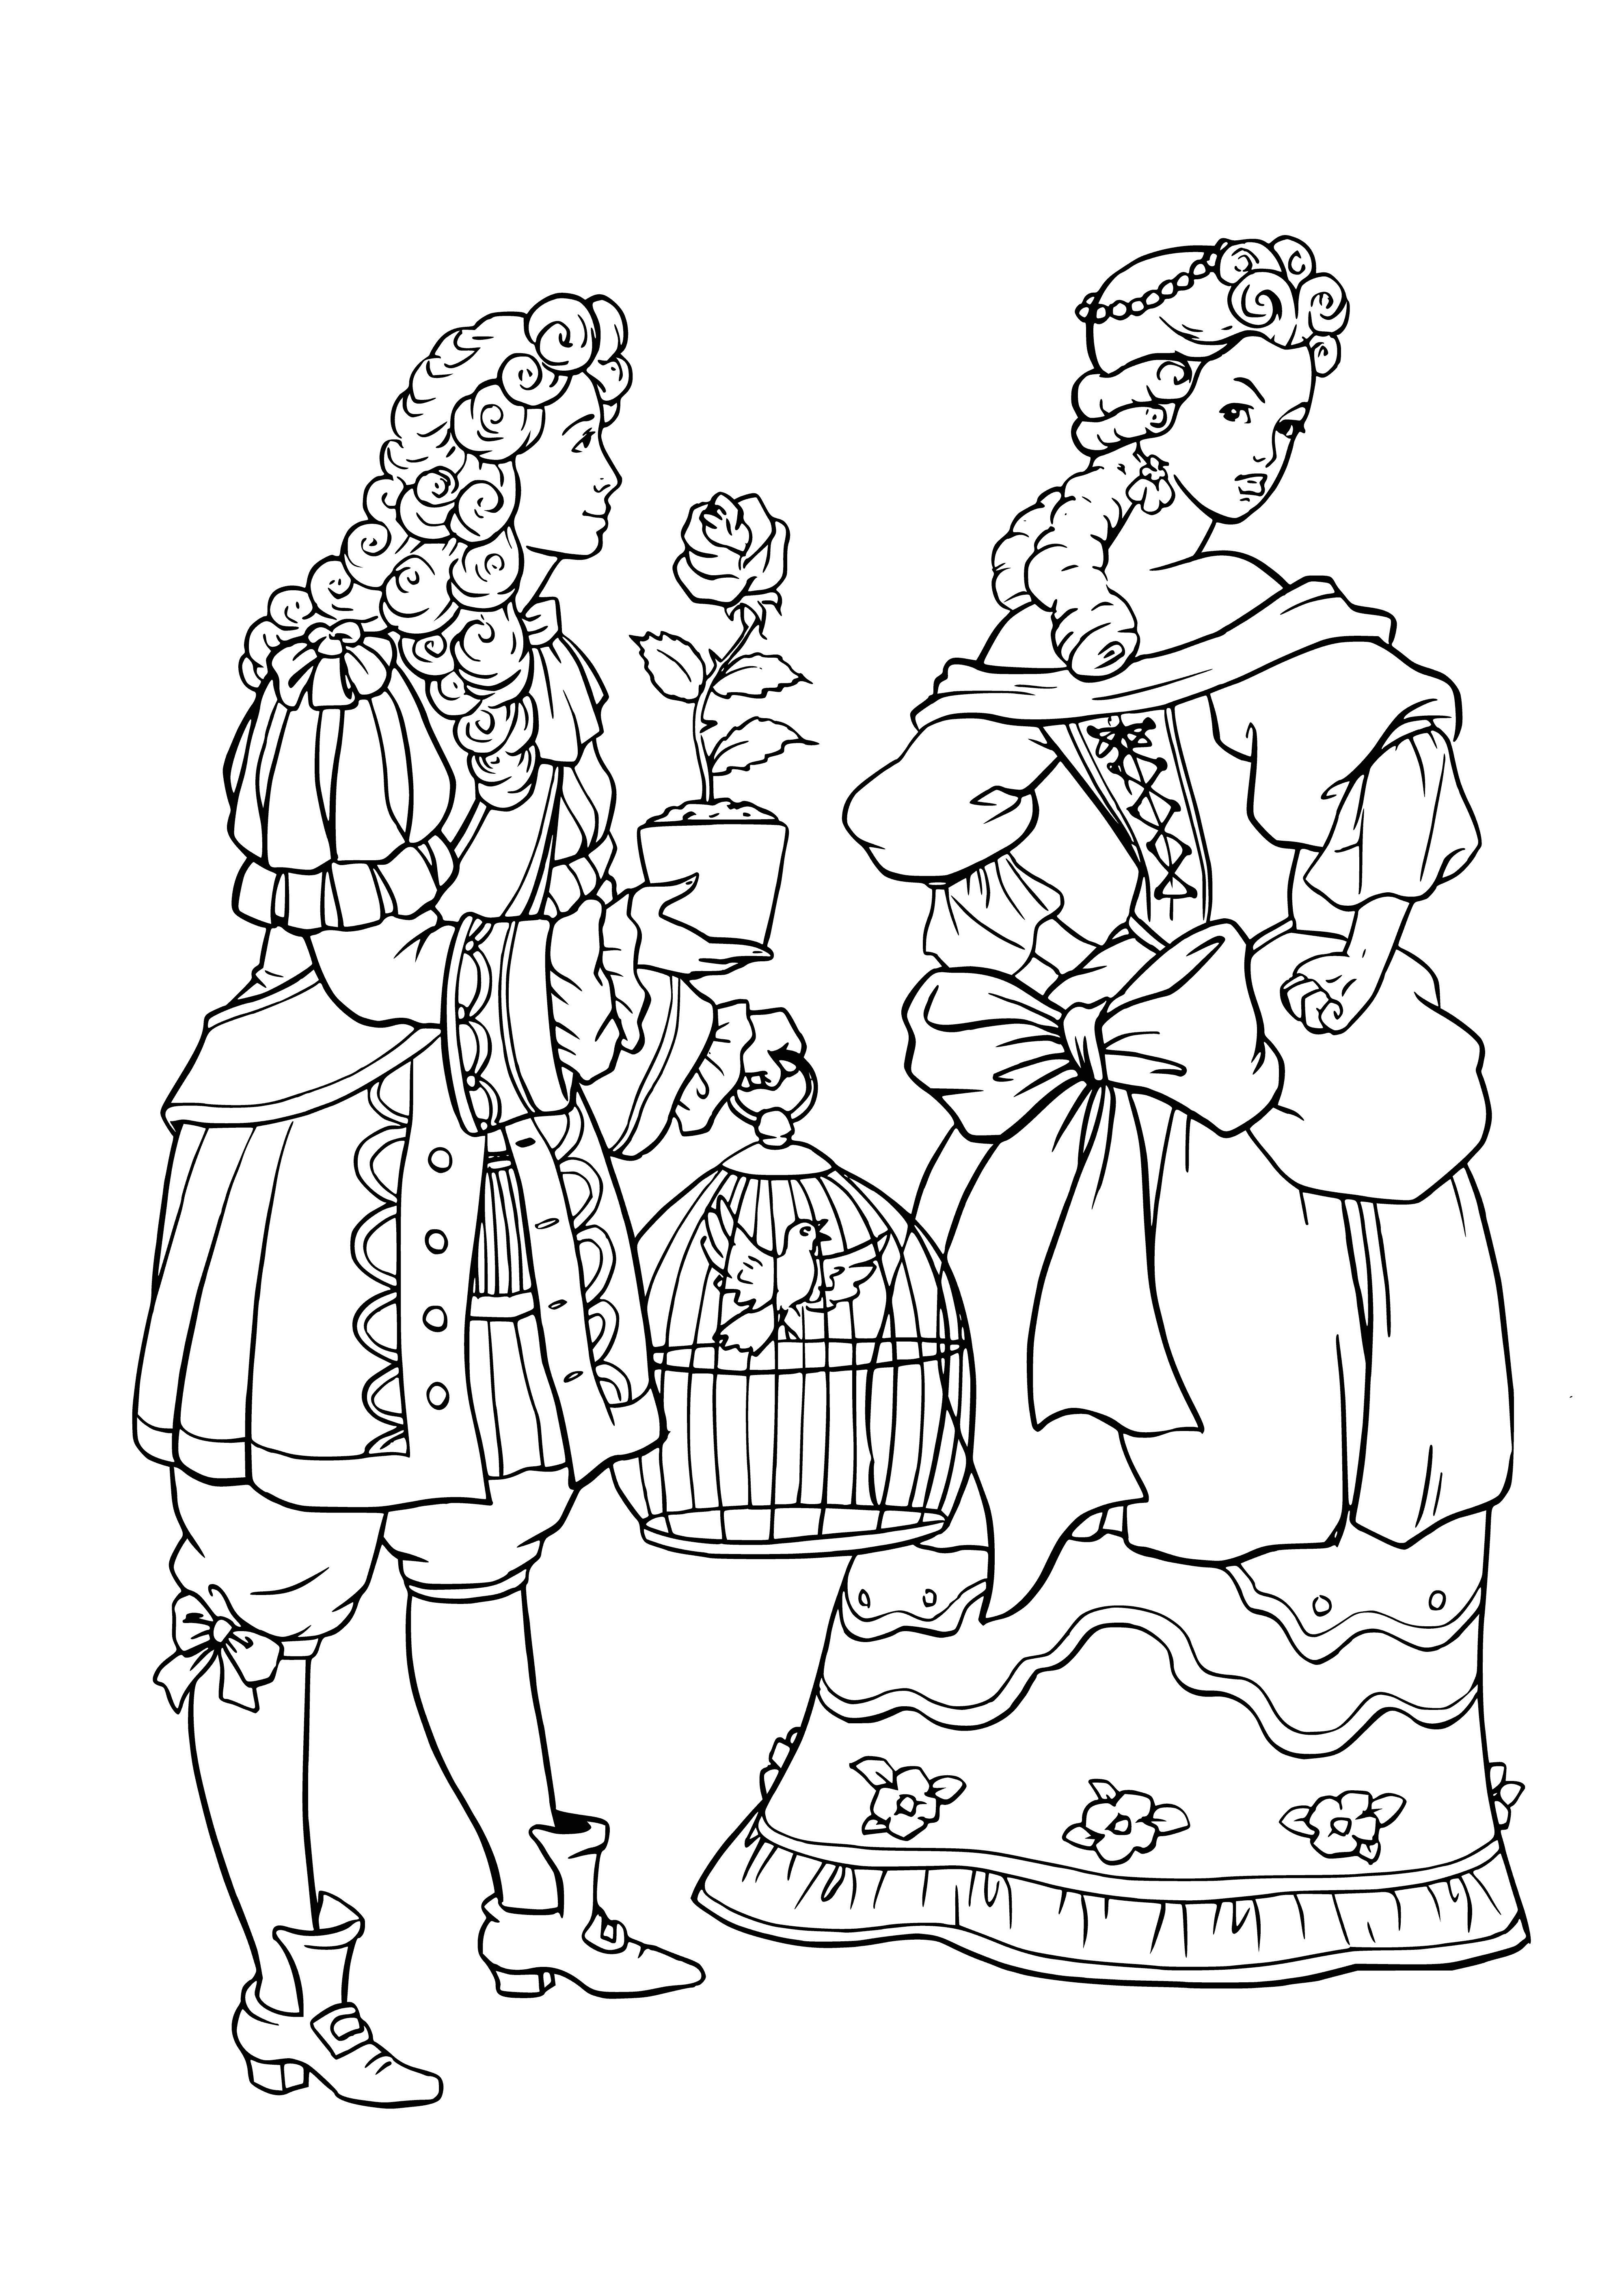 Prince, rose and nightingale coloring page